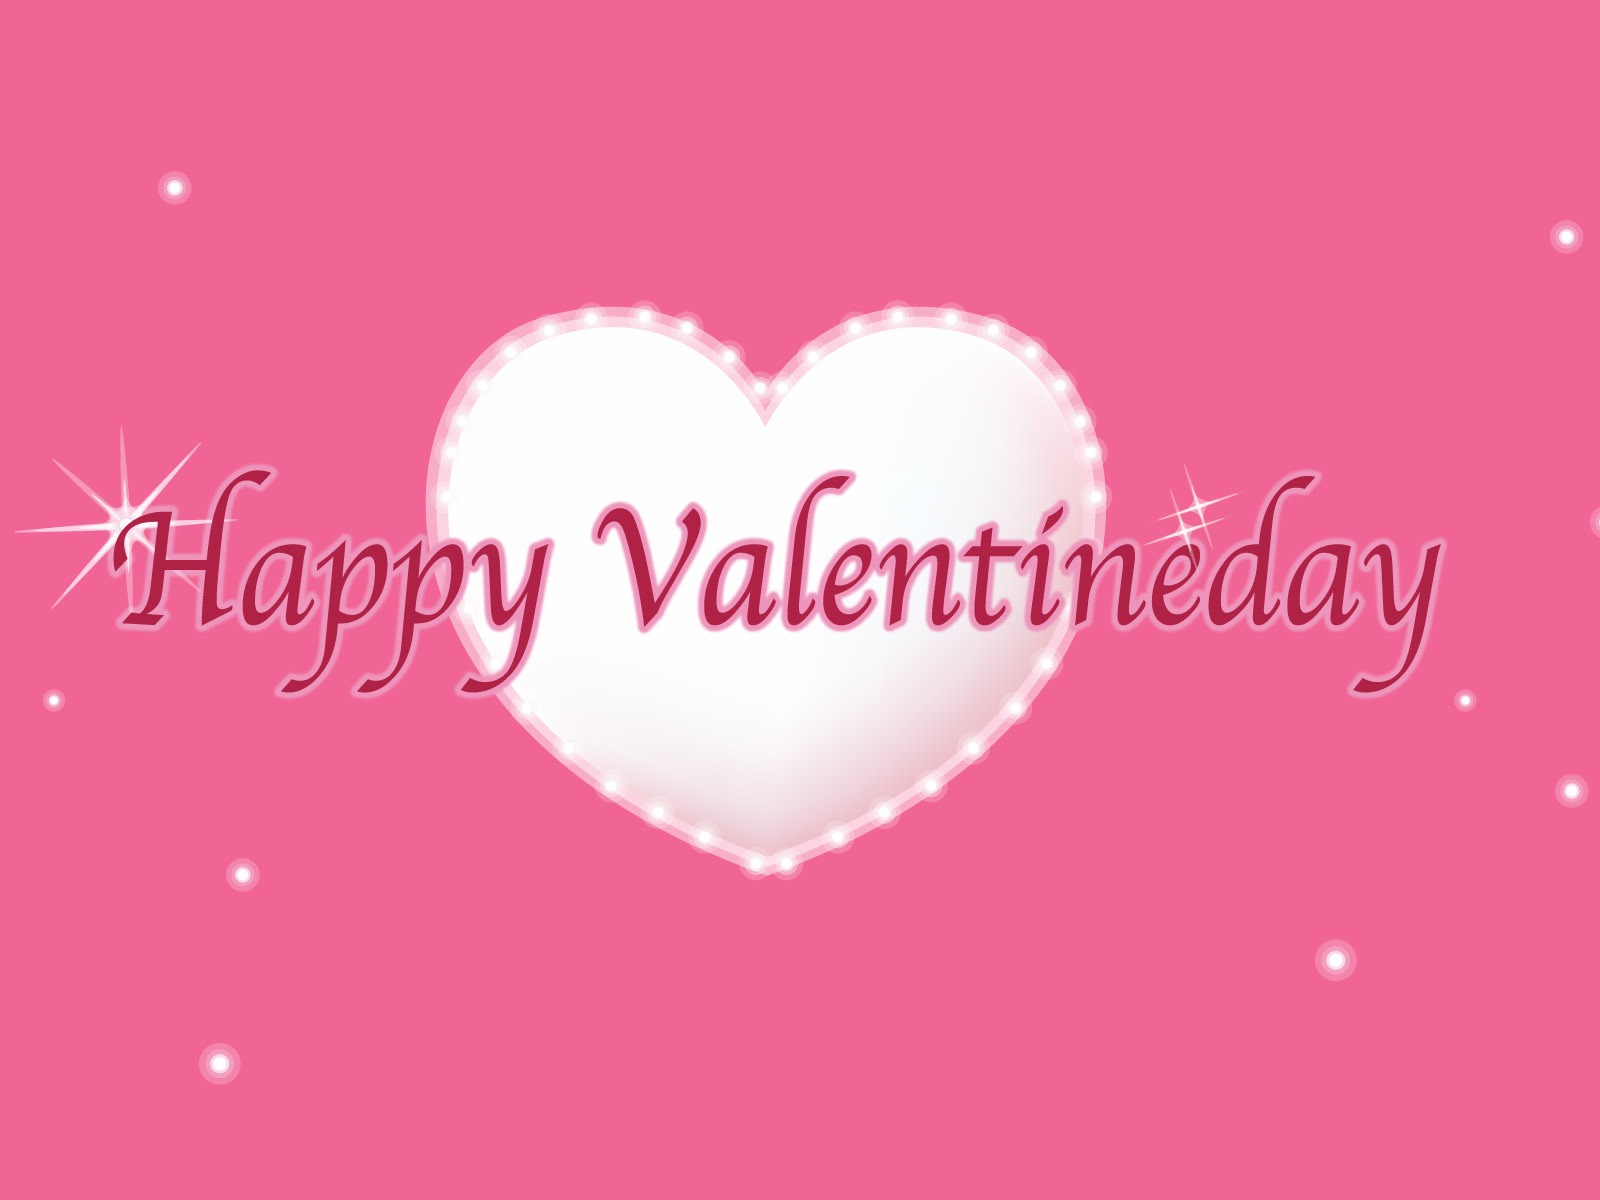 Valentine's Day Love Theme Wallpapers (3) #9 - 1600x1200